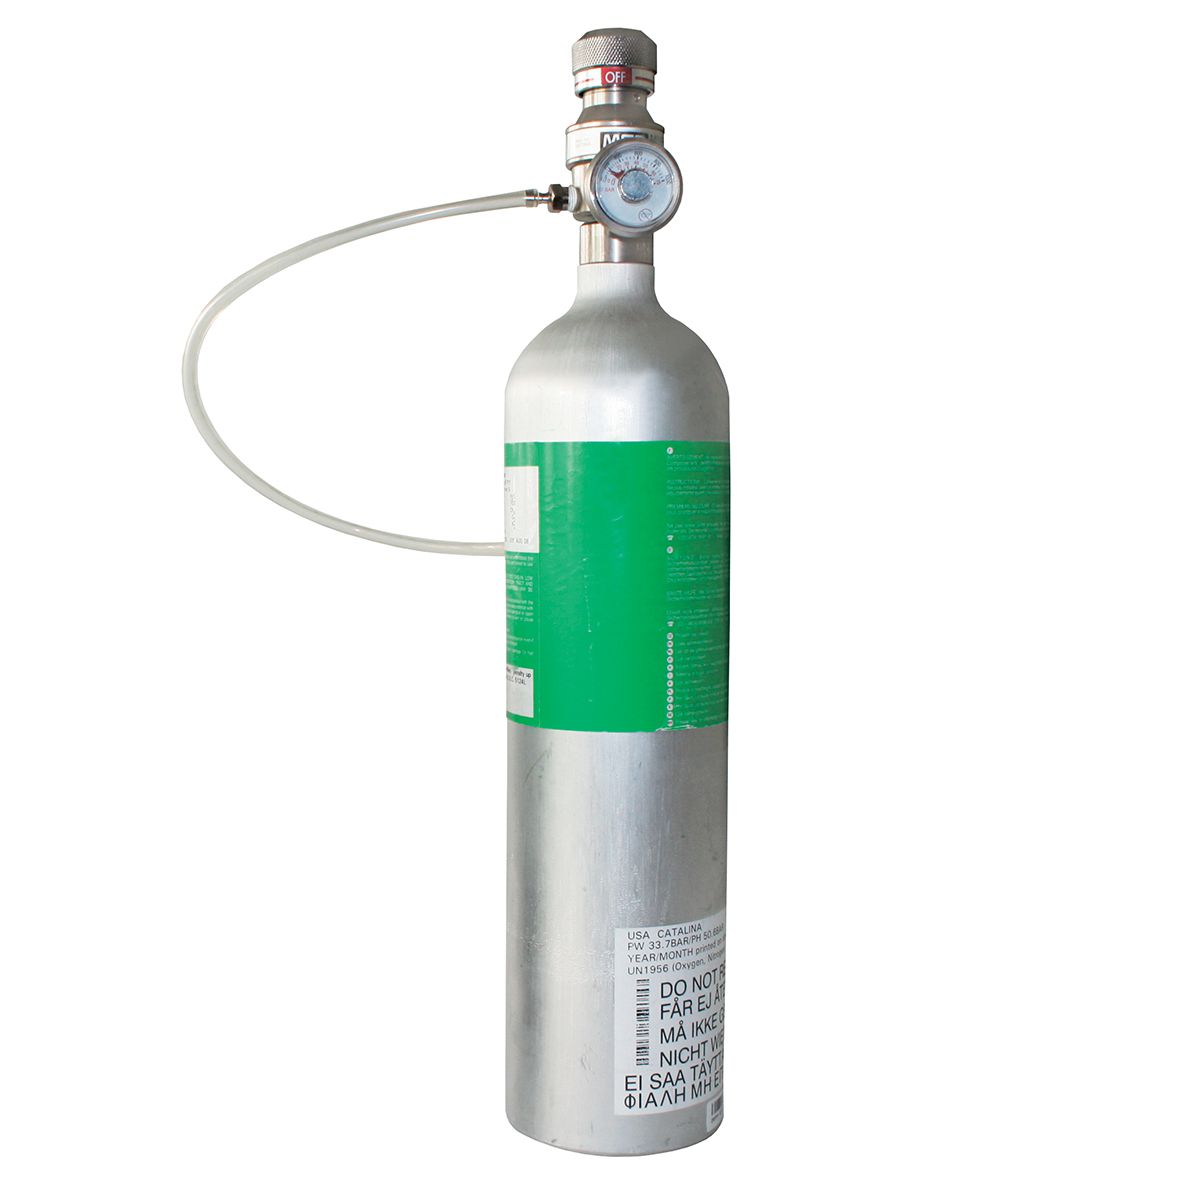 MSA mixed gas cylinder - 58 L - 1.45 vol.-% CH4, 60 ppm CO, 20 ppm H2S, 15 vol.-% O2 in N2 (test gas)